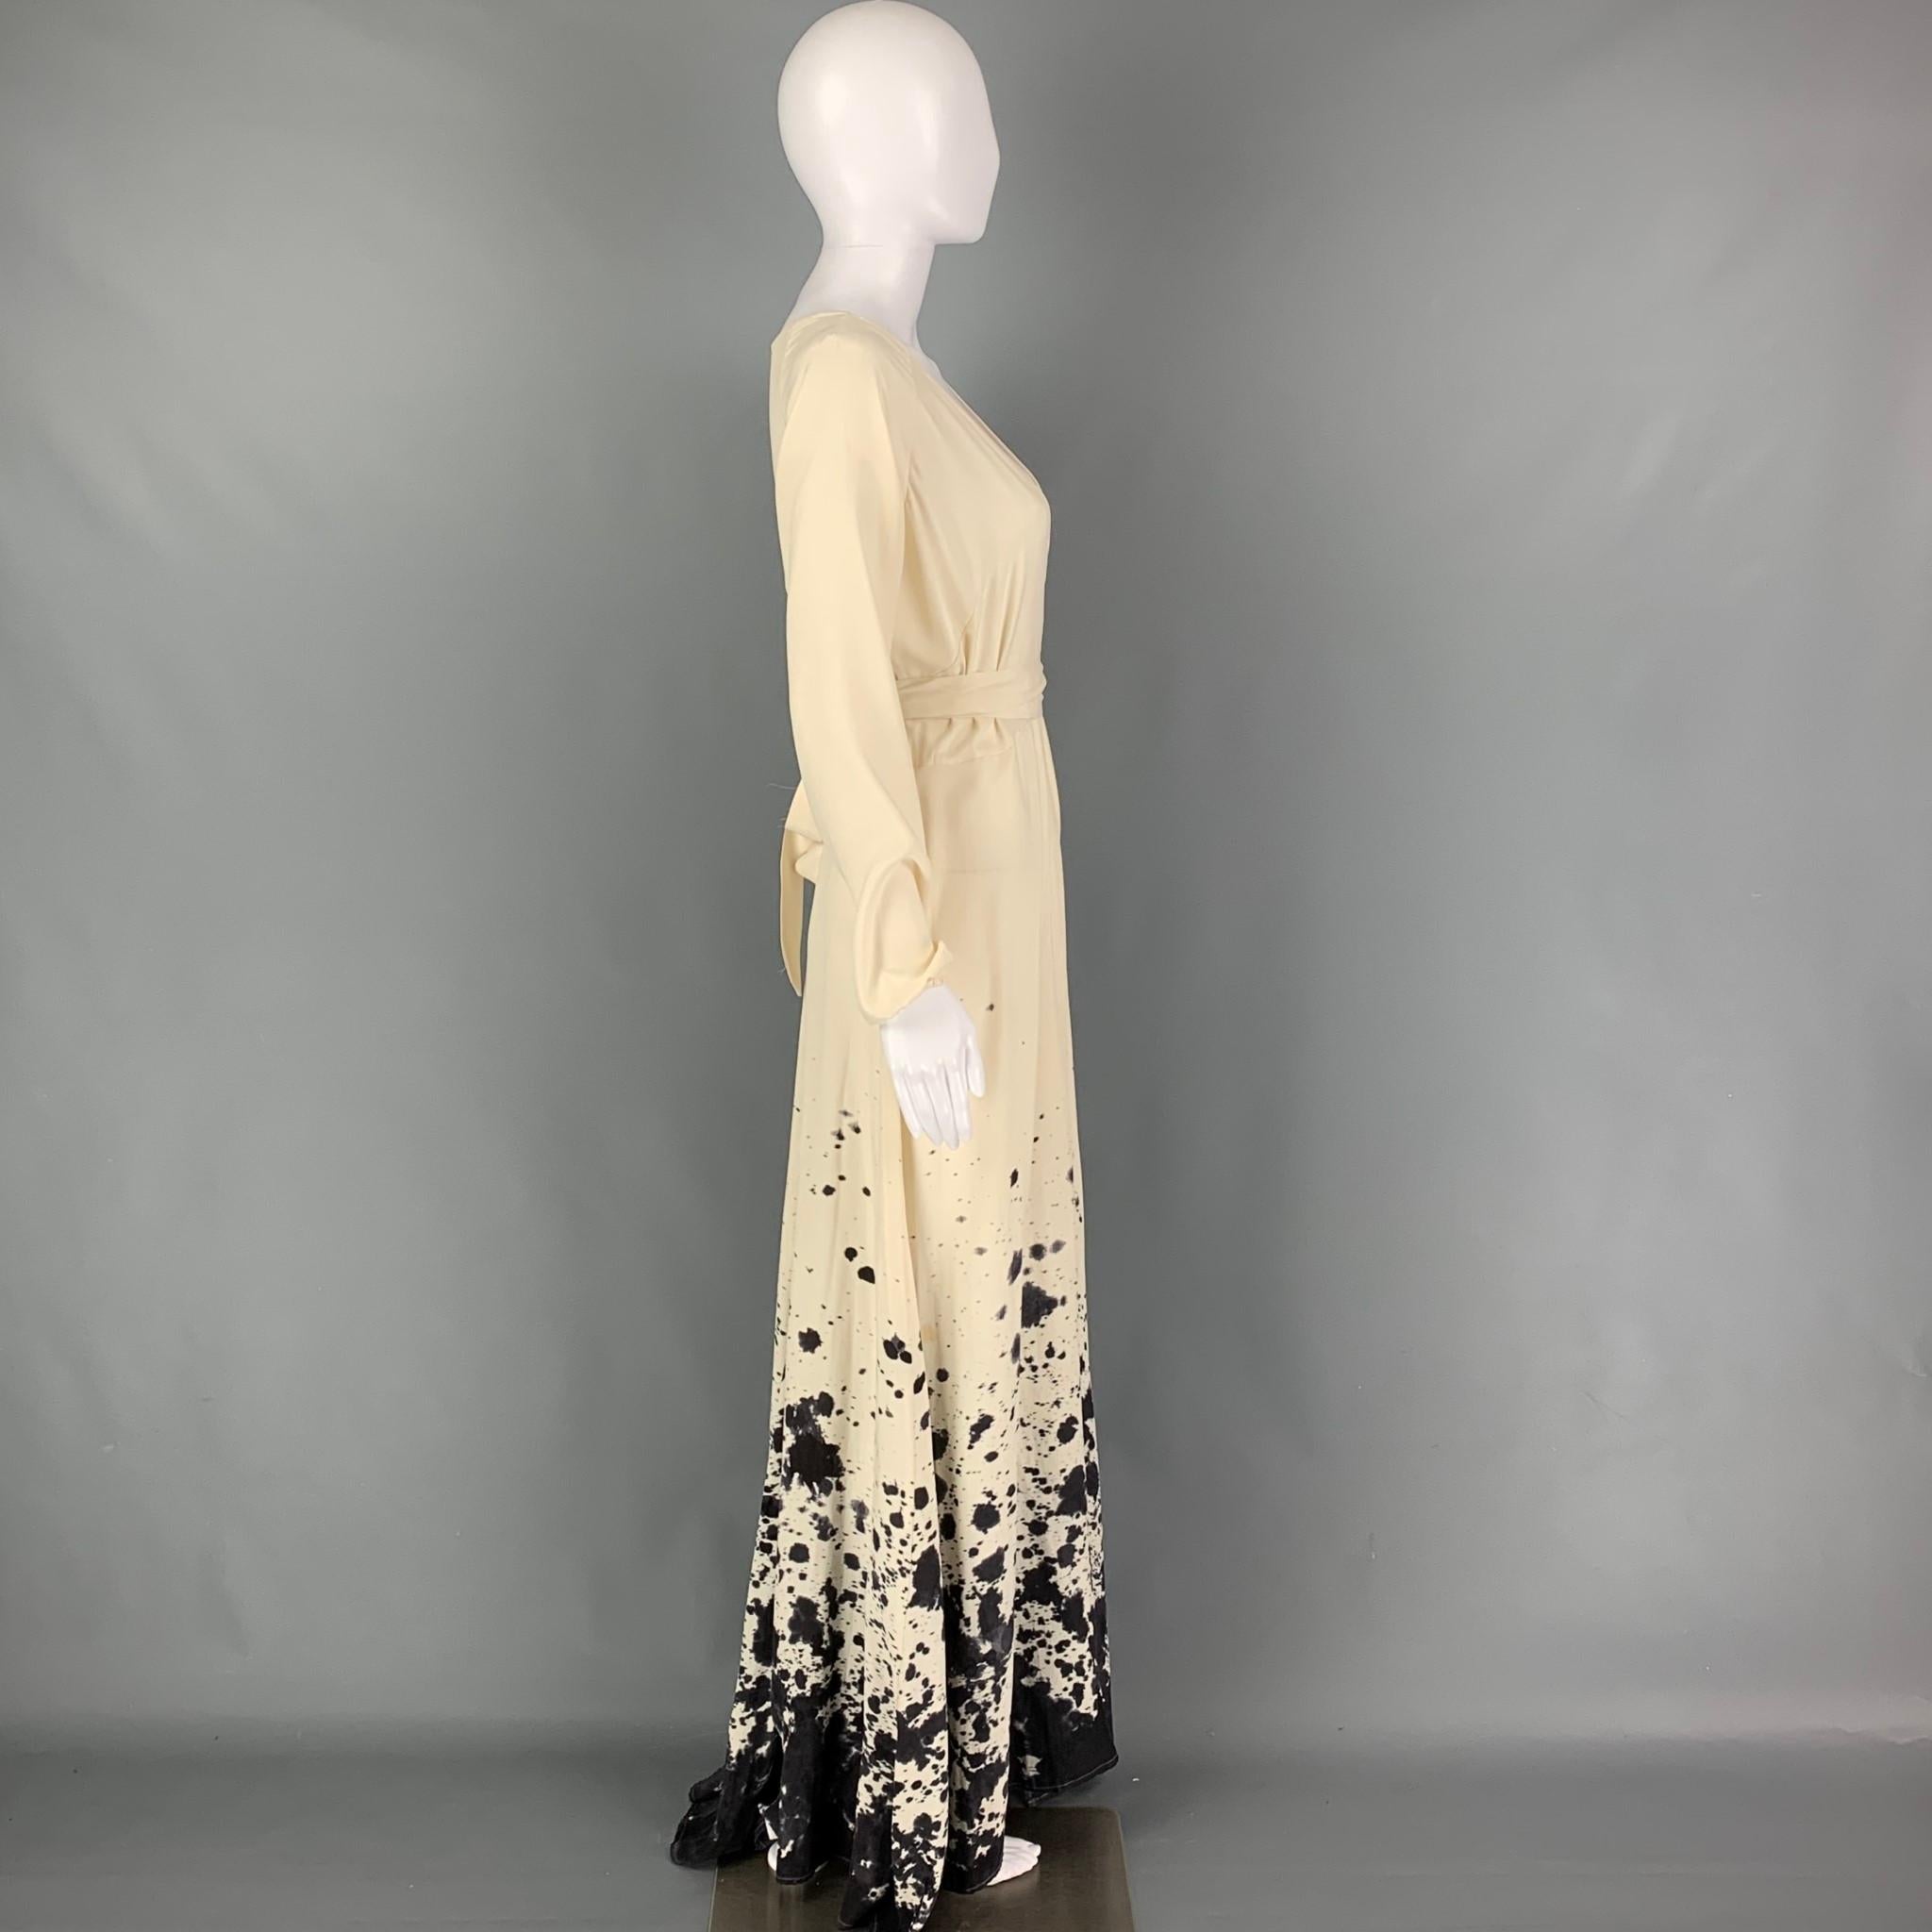 KAMPERETT dress comes in a cream & grey silk with hand painted details featuring a maxi wrap style, billowing full skirt, elastic cuffs, and a wrap around closure. Made in USA 

Good Pre-Owned Condition. Light discoloration.
Marked: S
Original